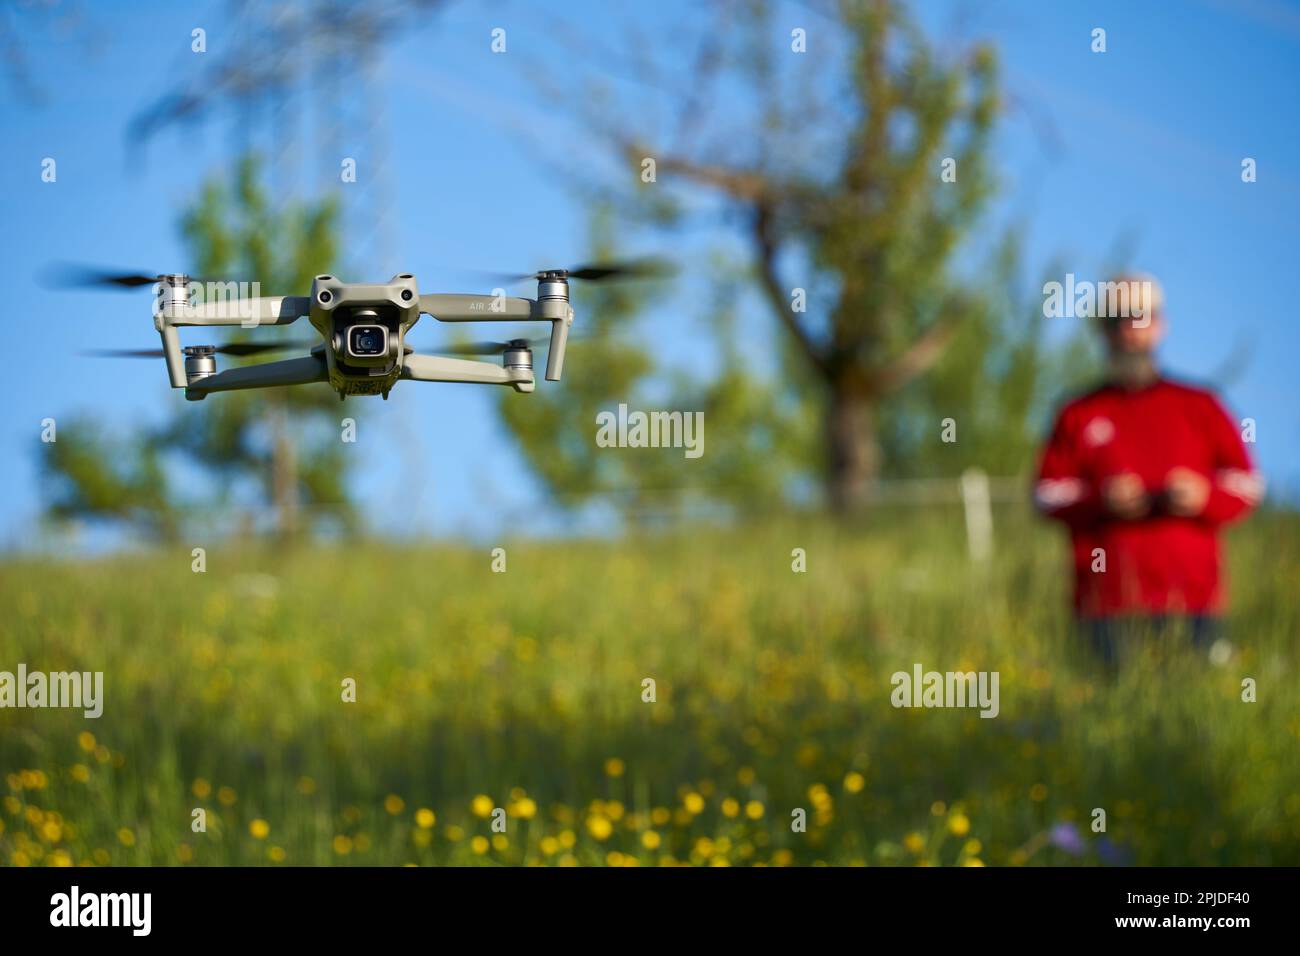 Nürtingen, Germany - May 29, 2021: Drone dji air 2s. Modern multicopter over wildflower field. Pilot with red sweater blurred in background. Stock Photo